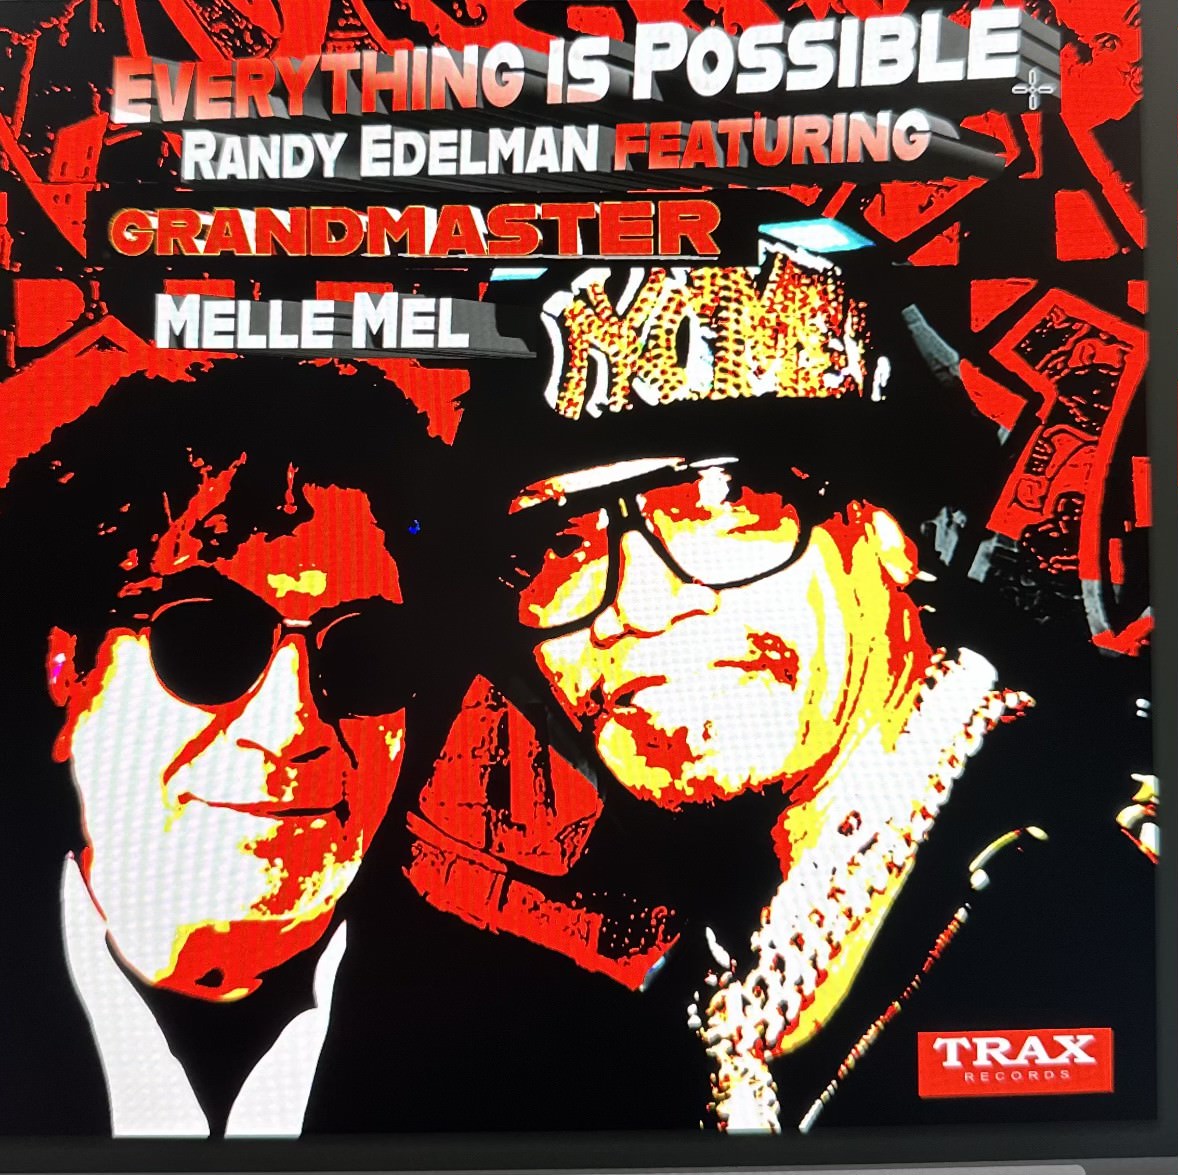 Everything is Possible - Randy Edelman Featuring Grandmaster Melle Mel